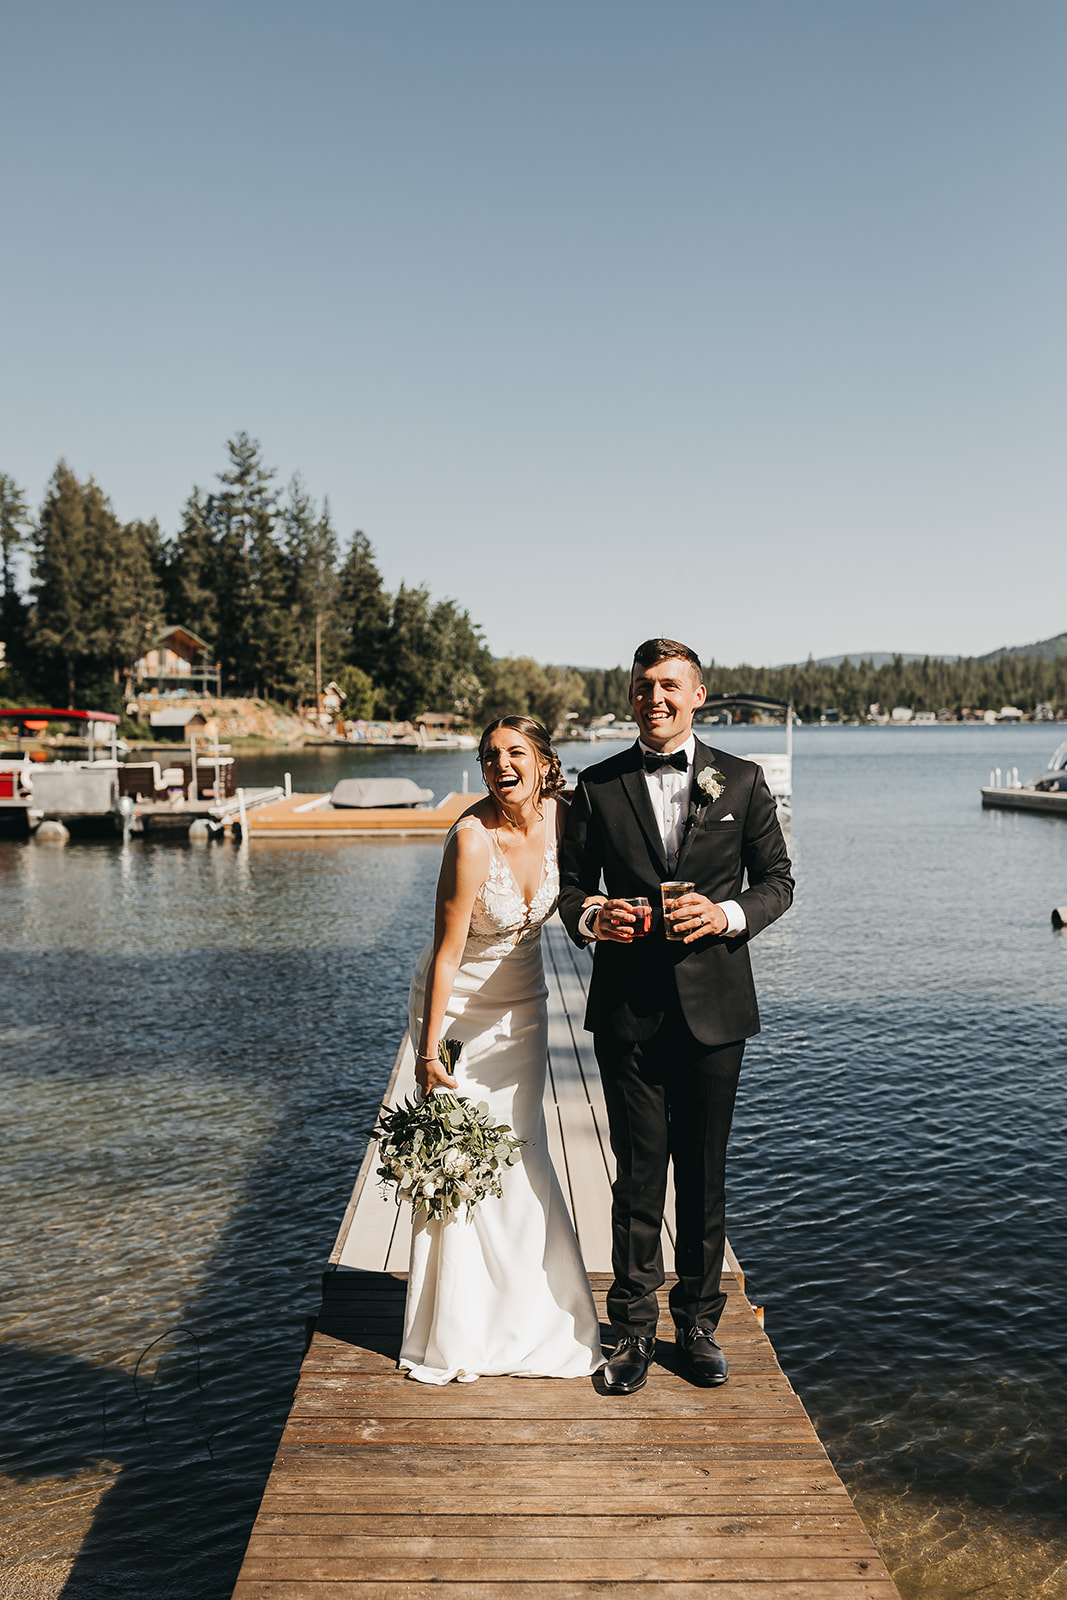 Bride and groom celebrate after on private dock private lake house lake front wedding.